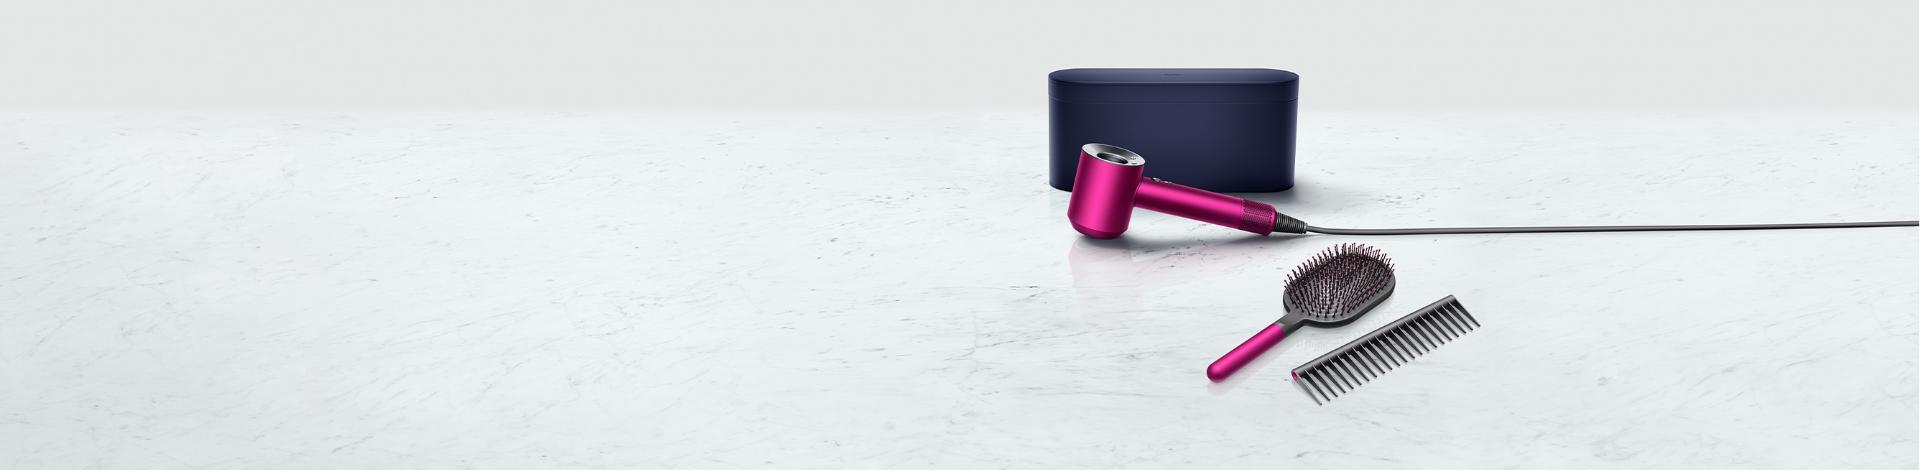 Dyson Supersonic™ hair dryer with presentation case, paddle brush, and detangling comb